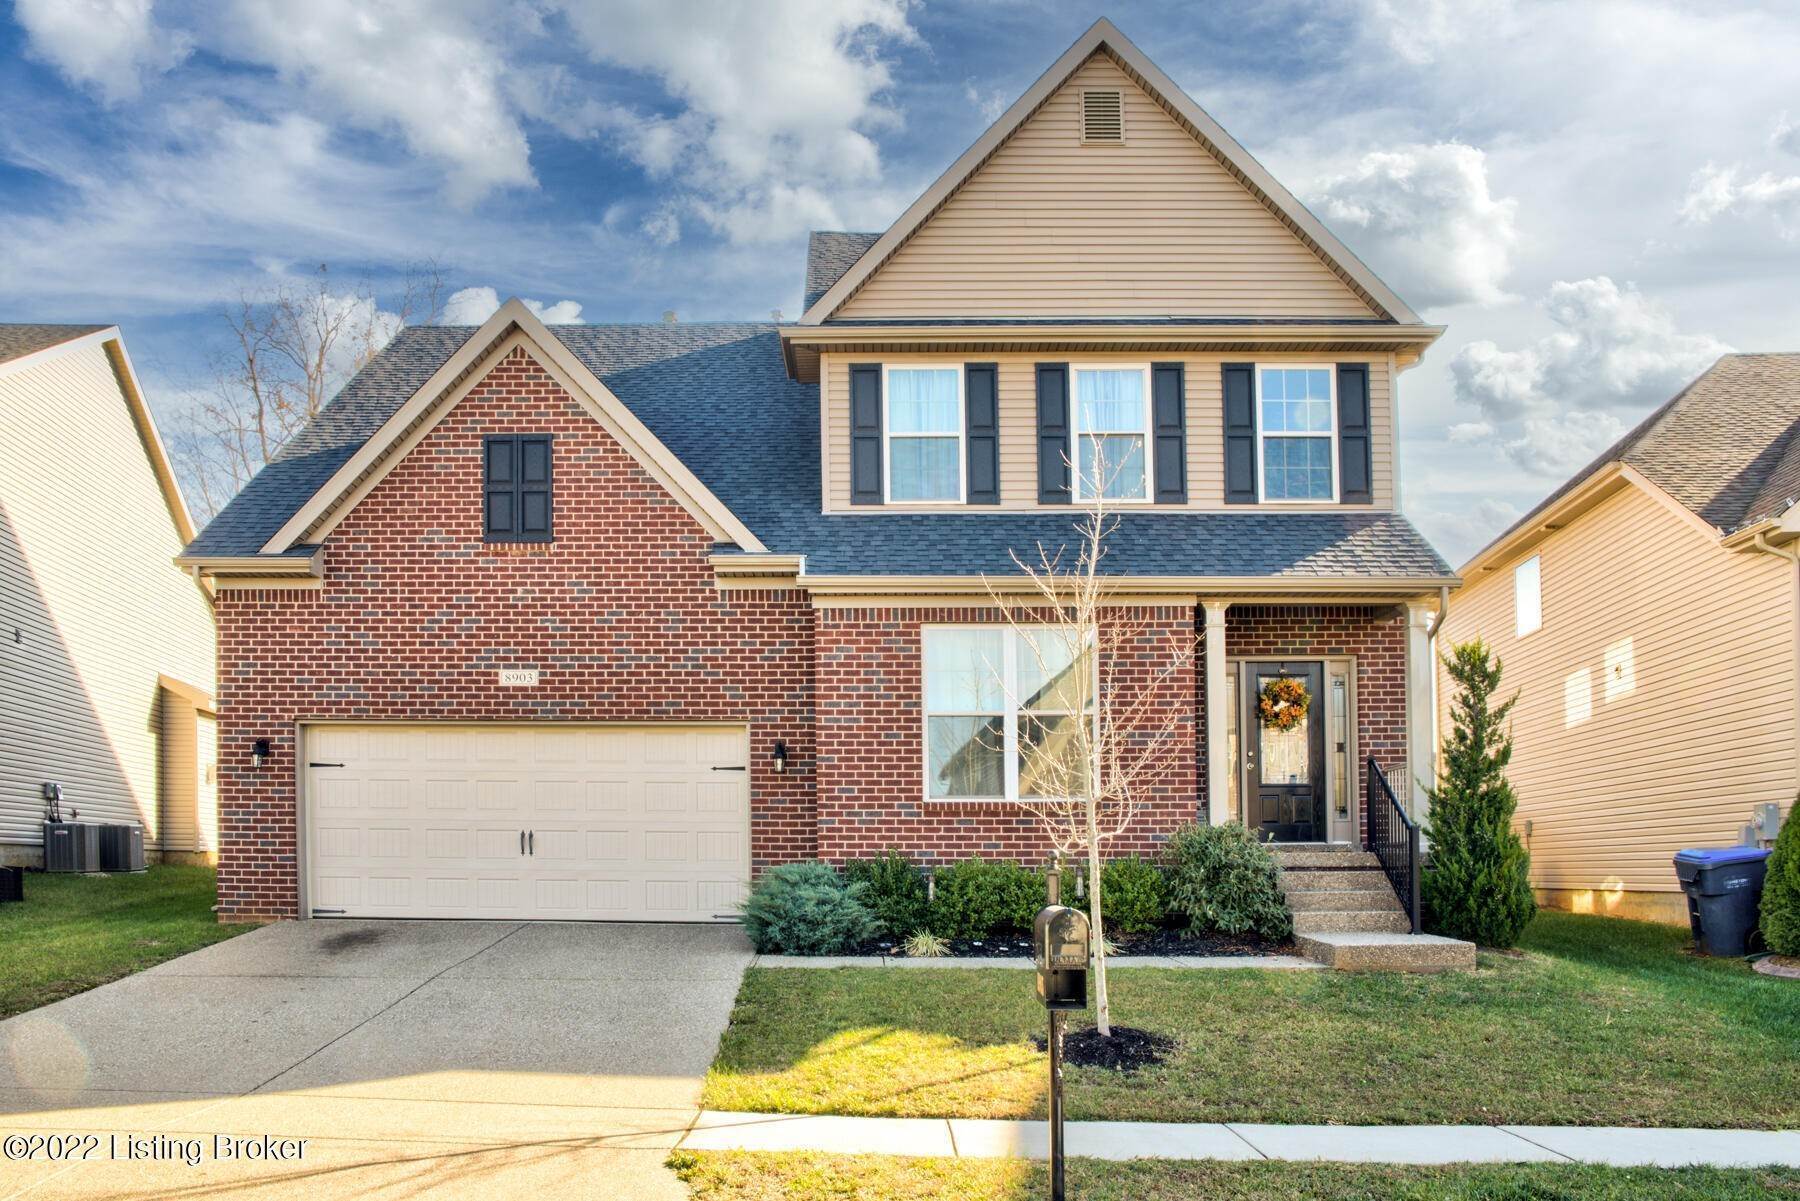 Single Family at Louisville, KY 40229